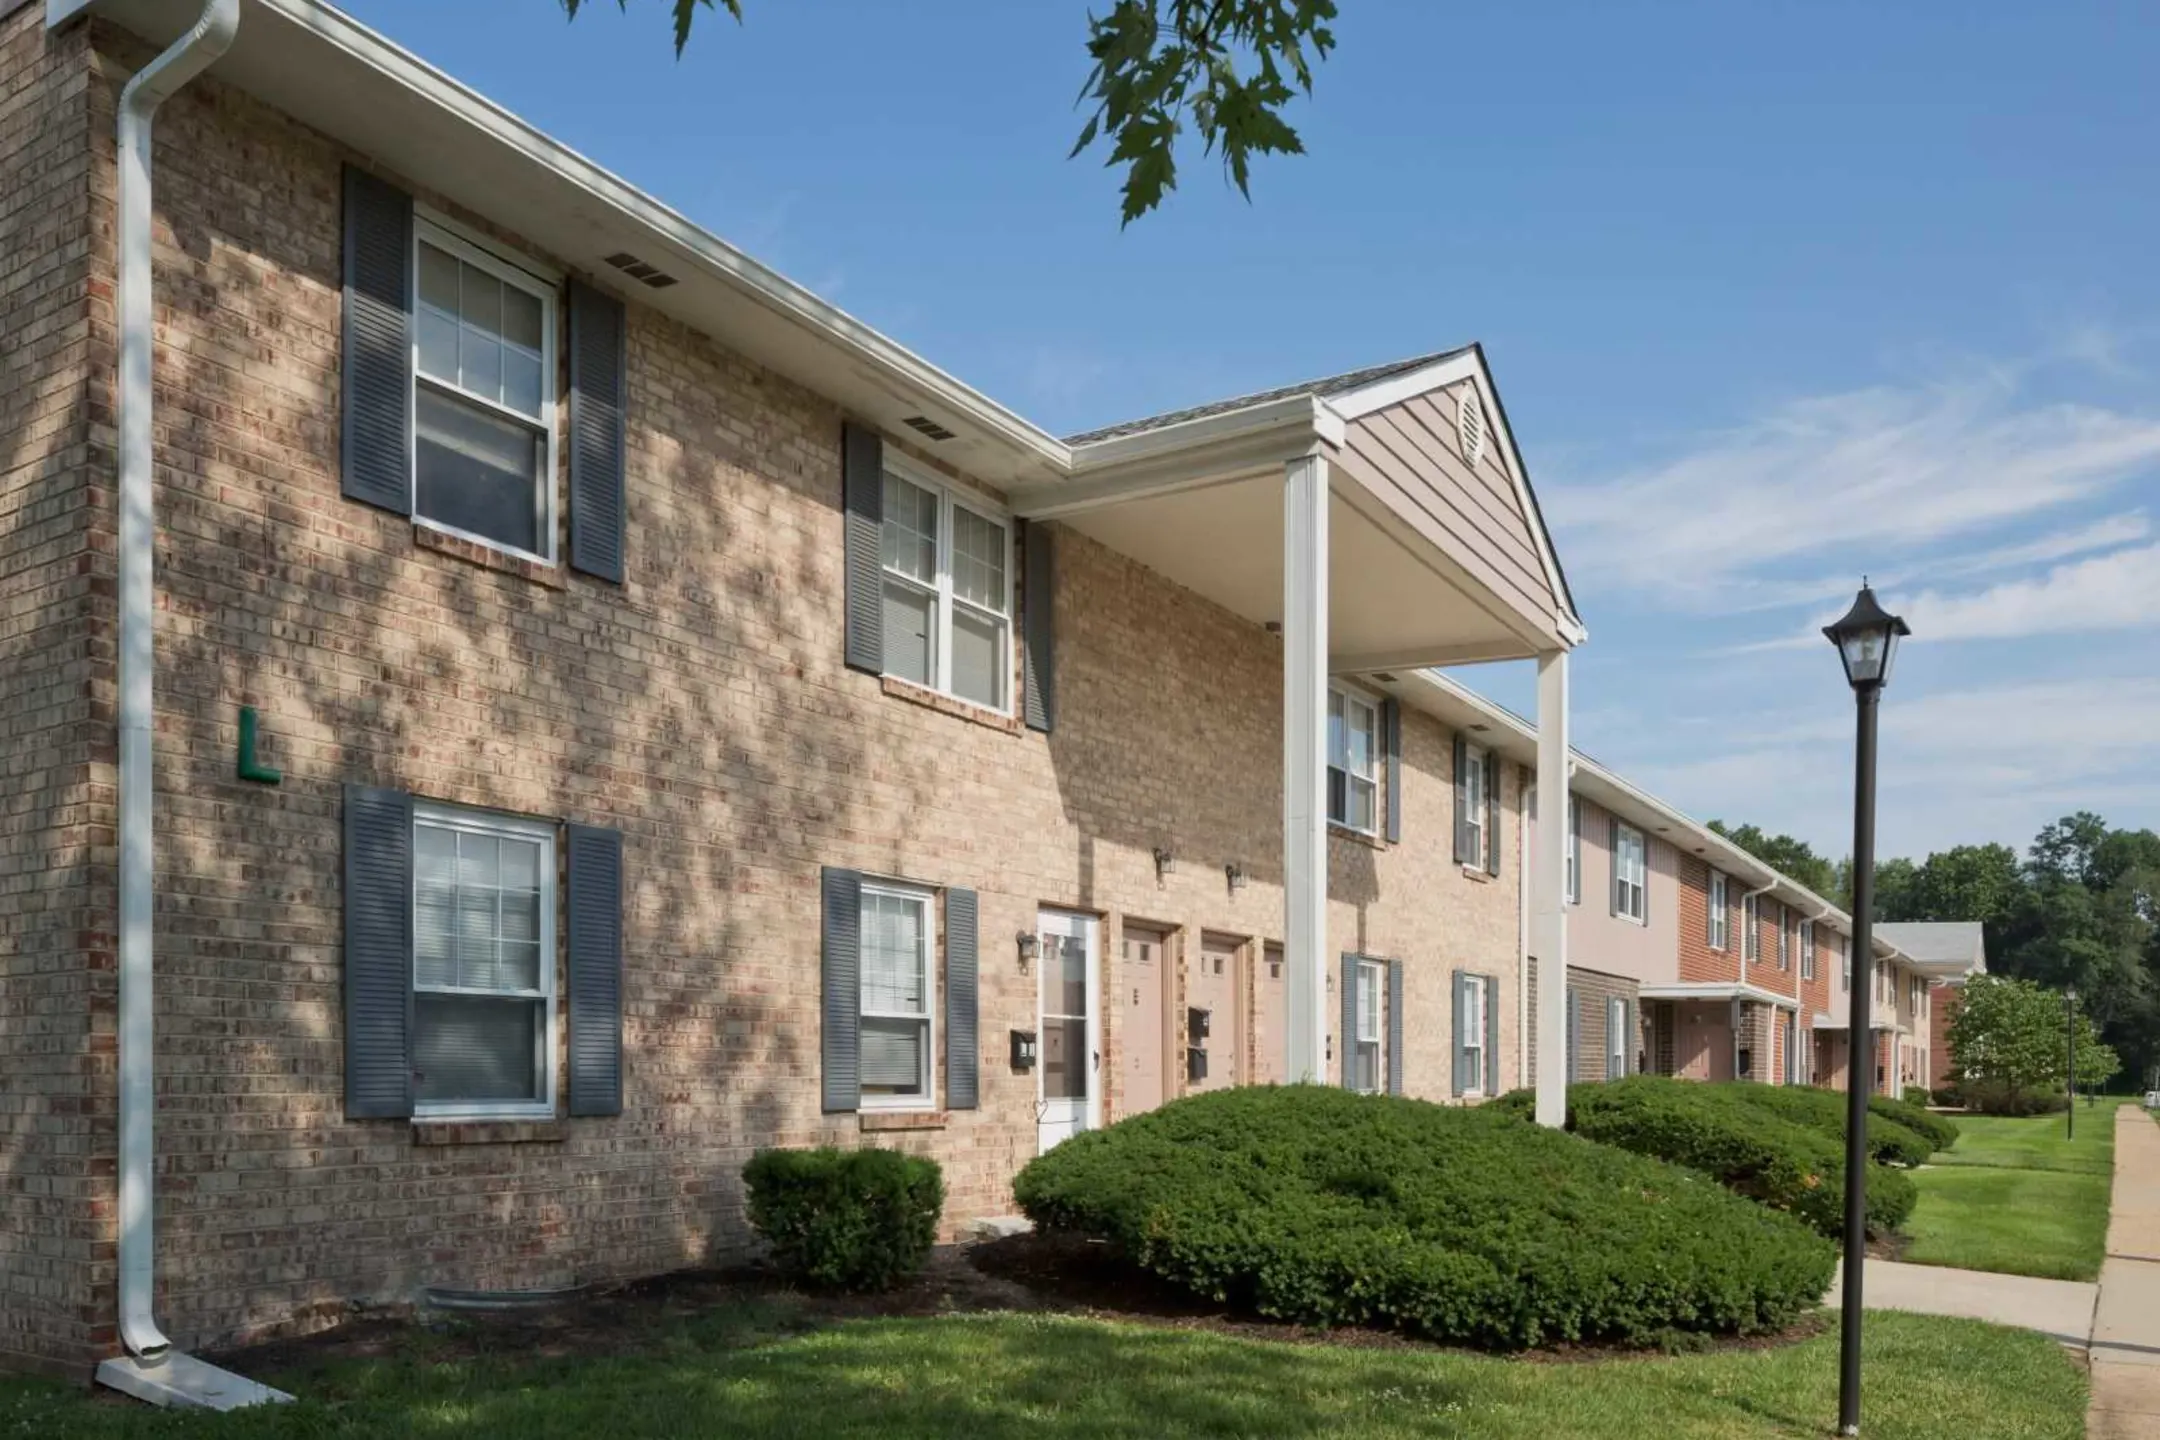 Building - Pickwick Apartments - Maple Shade, NJ